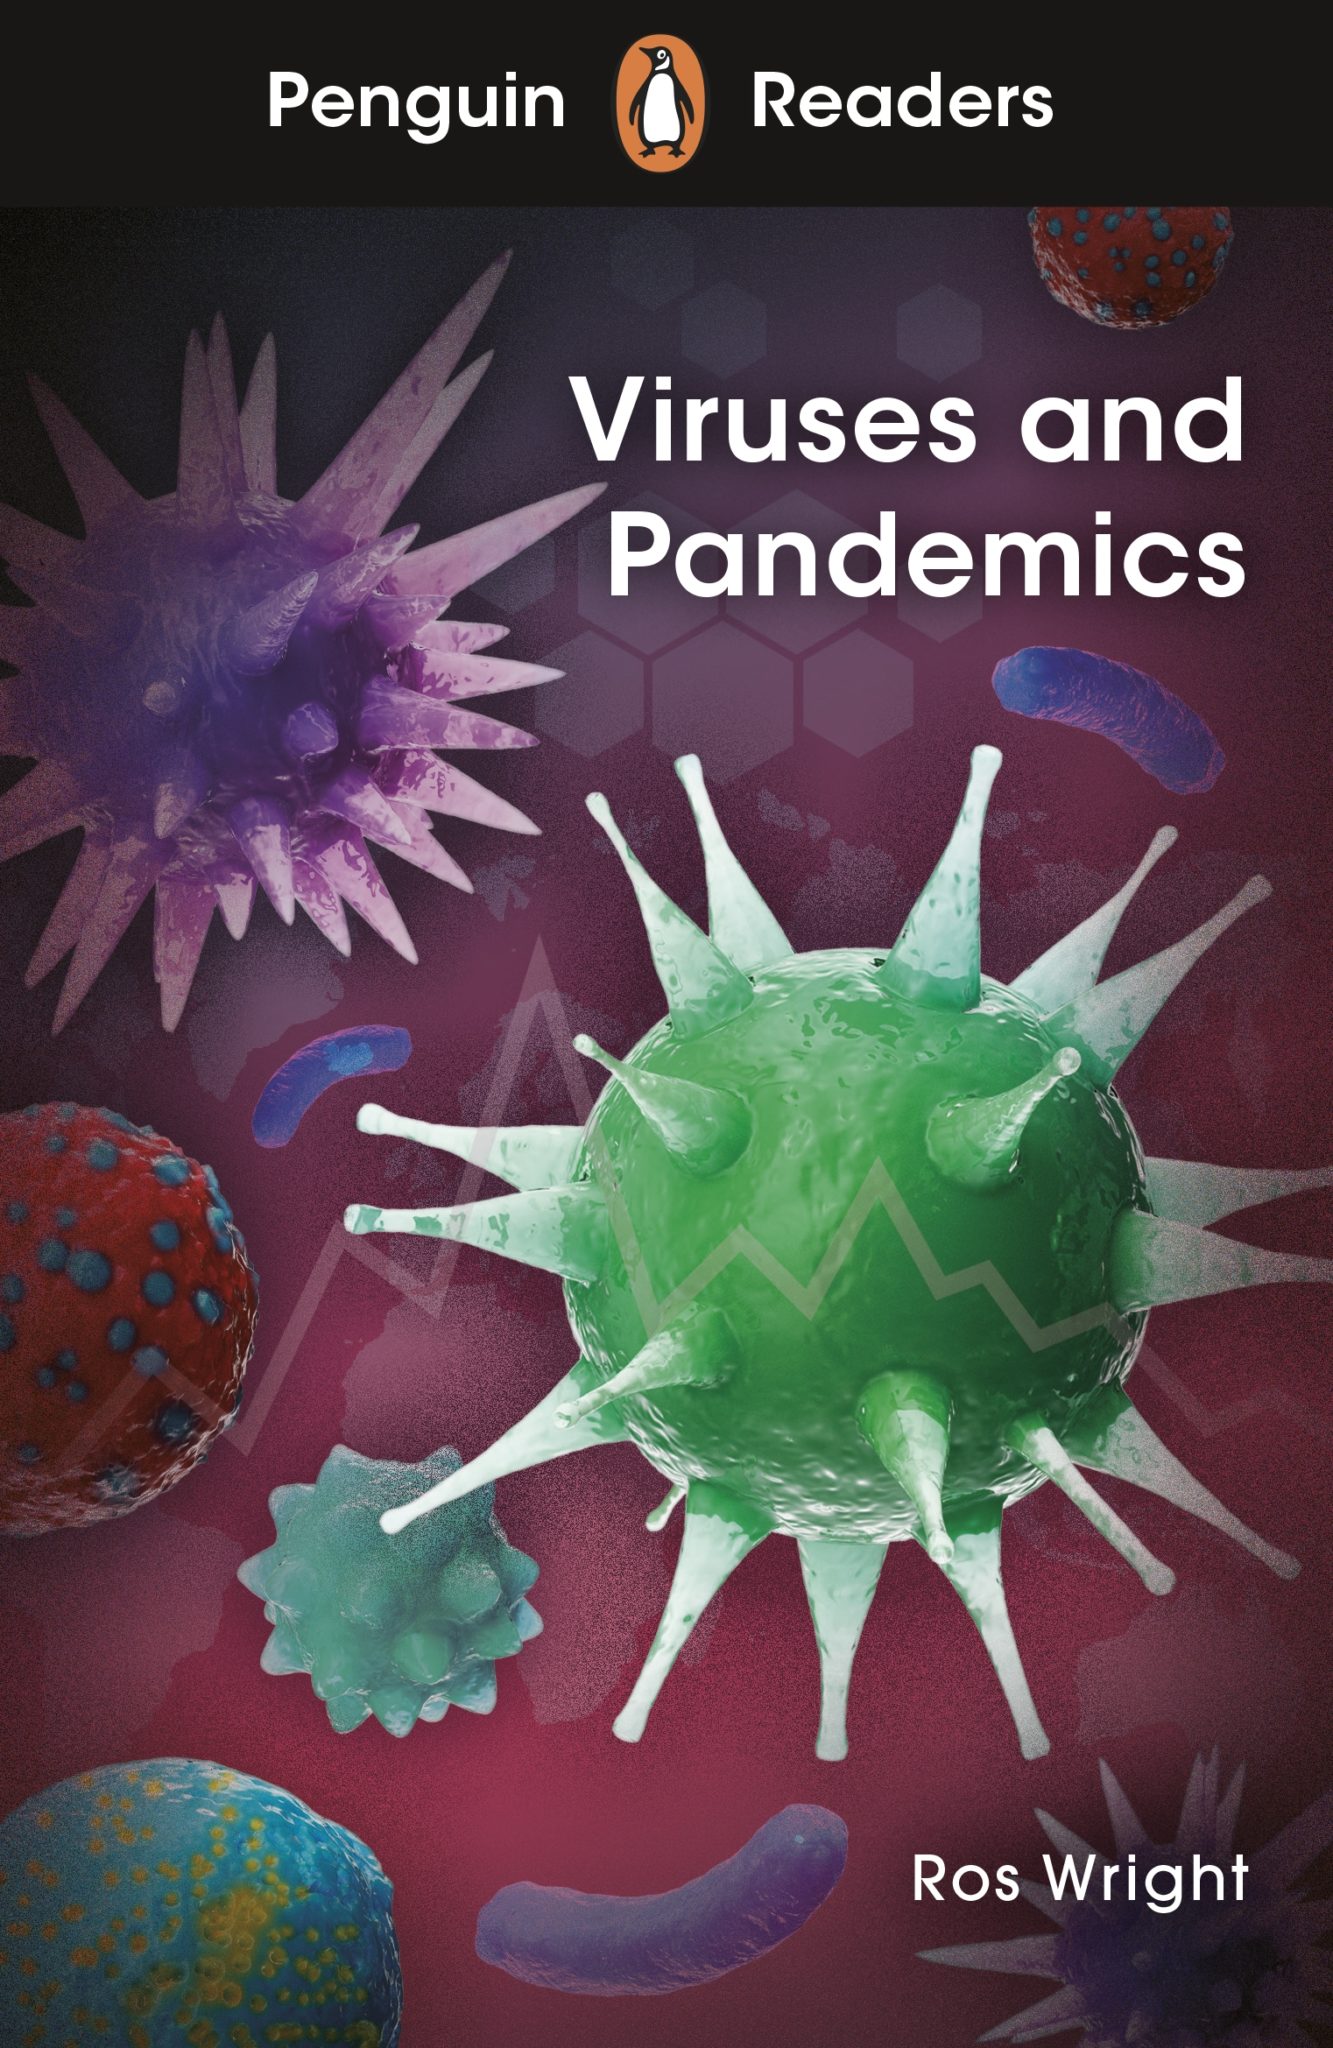 Penguin Readers for EAL: Level 6 Viruses and Pandemics